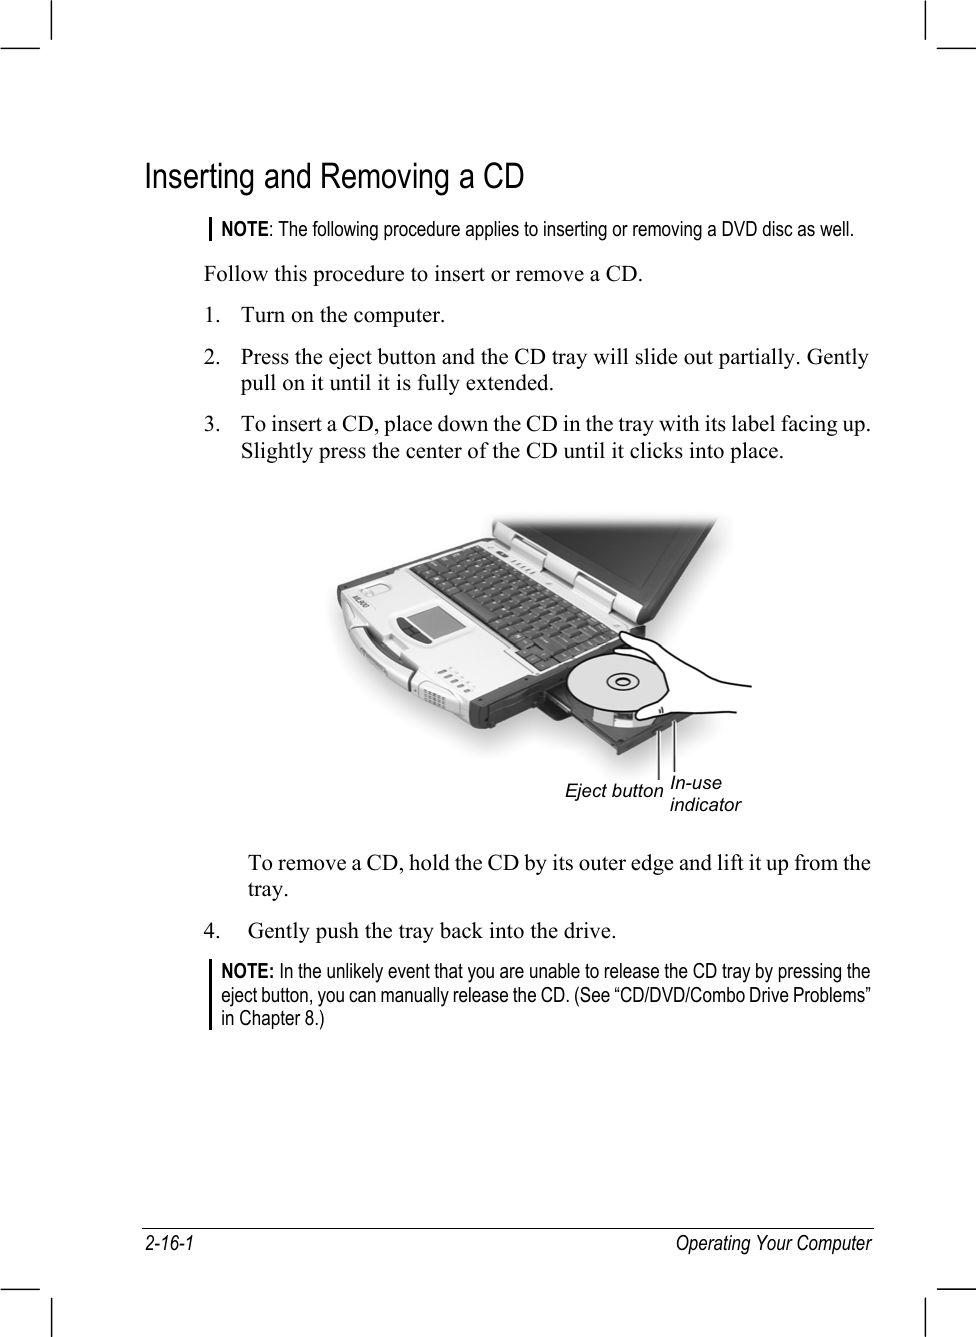 2-16-1 Operating Your ComputerInserting and Removing a CDNOTE: The following procedure applies to inserting or removing a DVD disc as well.Follow this procedure to insert or remove a CD.1. Turn on the computer.2. Press the eject button and the CD tray will slide out partially. Gentlypull on it until it is fully extended.3. To insert a CD, place down the CD in the tray with its label facing up.Slightly press the center of the CD until it clicks into place.To remove a CD, hold the CD by its outer edge and lift it up from thetray.4. Gently push the tray back into the drive.NOTE: In the unlikely event that you are unable to release the CD tray by pressing theeject button, you can manually release the CD. (See “CD/DVD/Combo Drive Problems”in Chapter 8.)Eject button In-useindicator